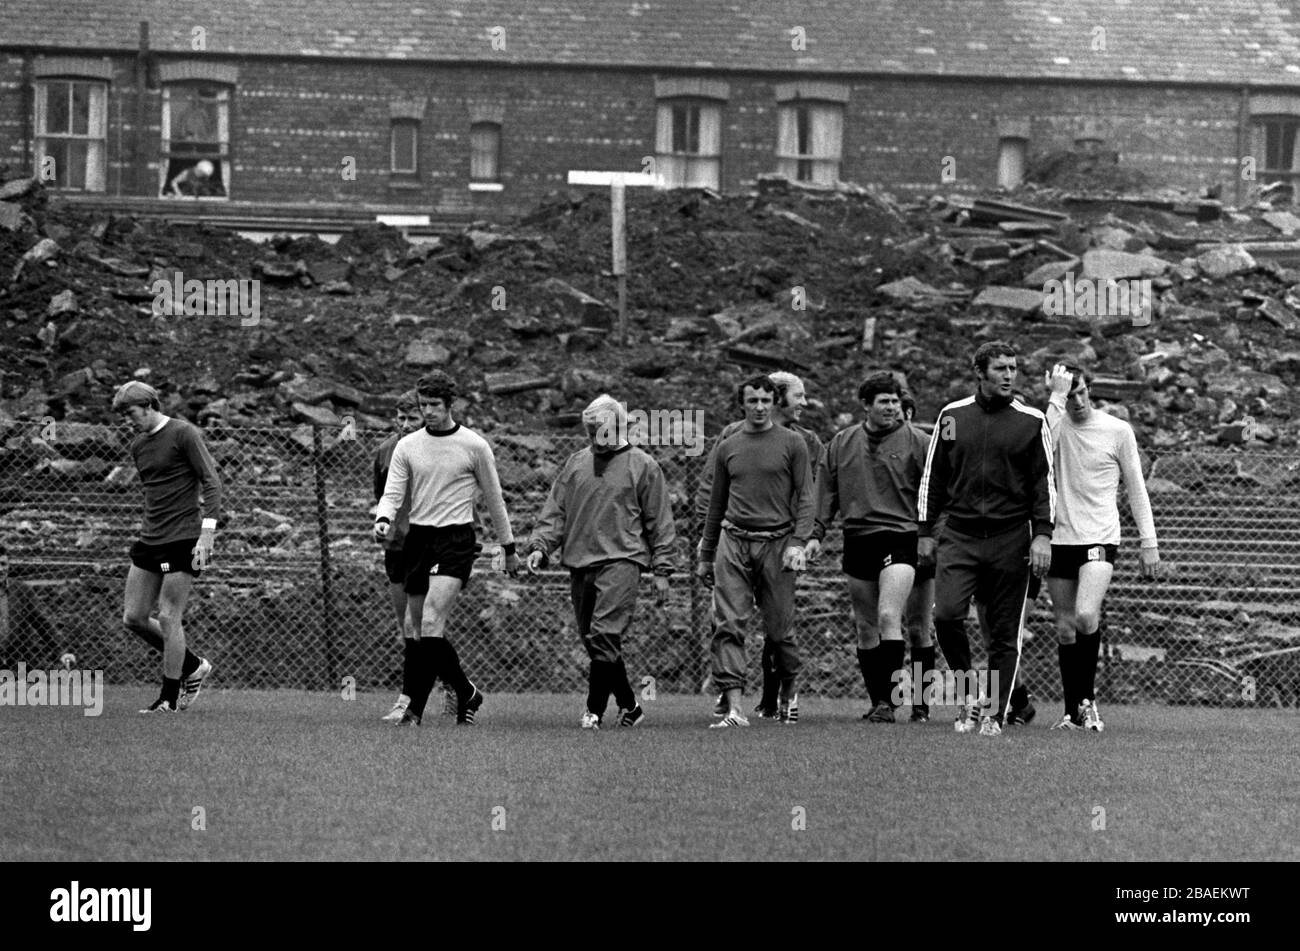 (L-R) Manchester City's Colin Bell, Tony Book, Mike Doyle, Francis Lee, Mike Summerbee, George Heslop, Freddie Hill, coach Malcolm Allison and Tommy Booth warm up with a slow walk around Maine Road Stock Photo